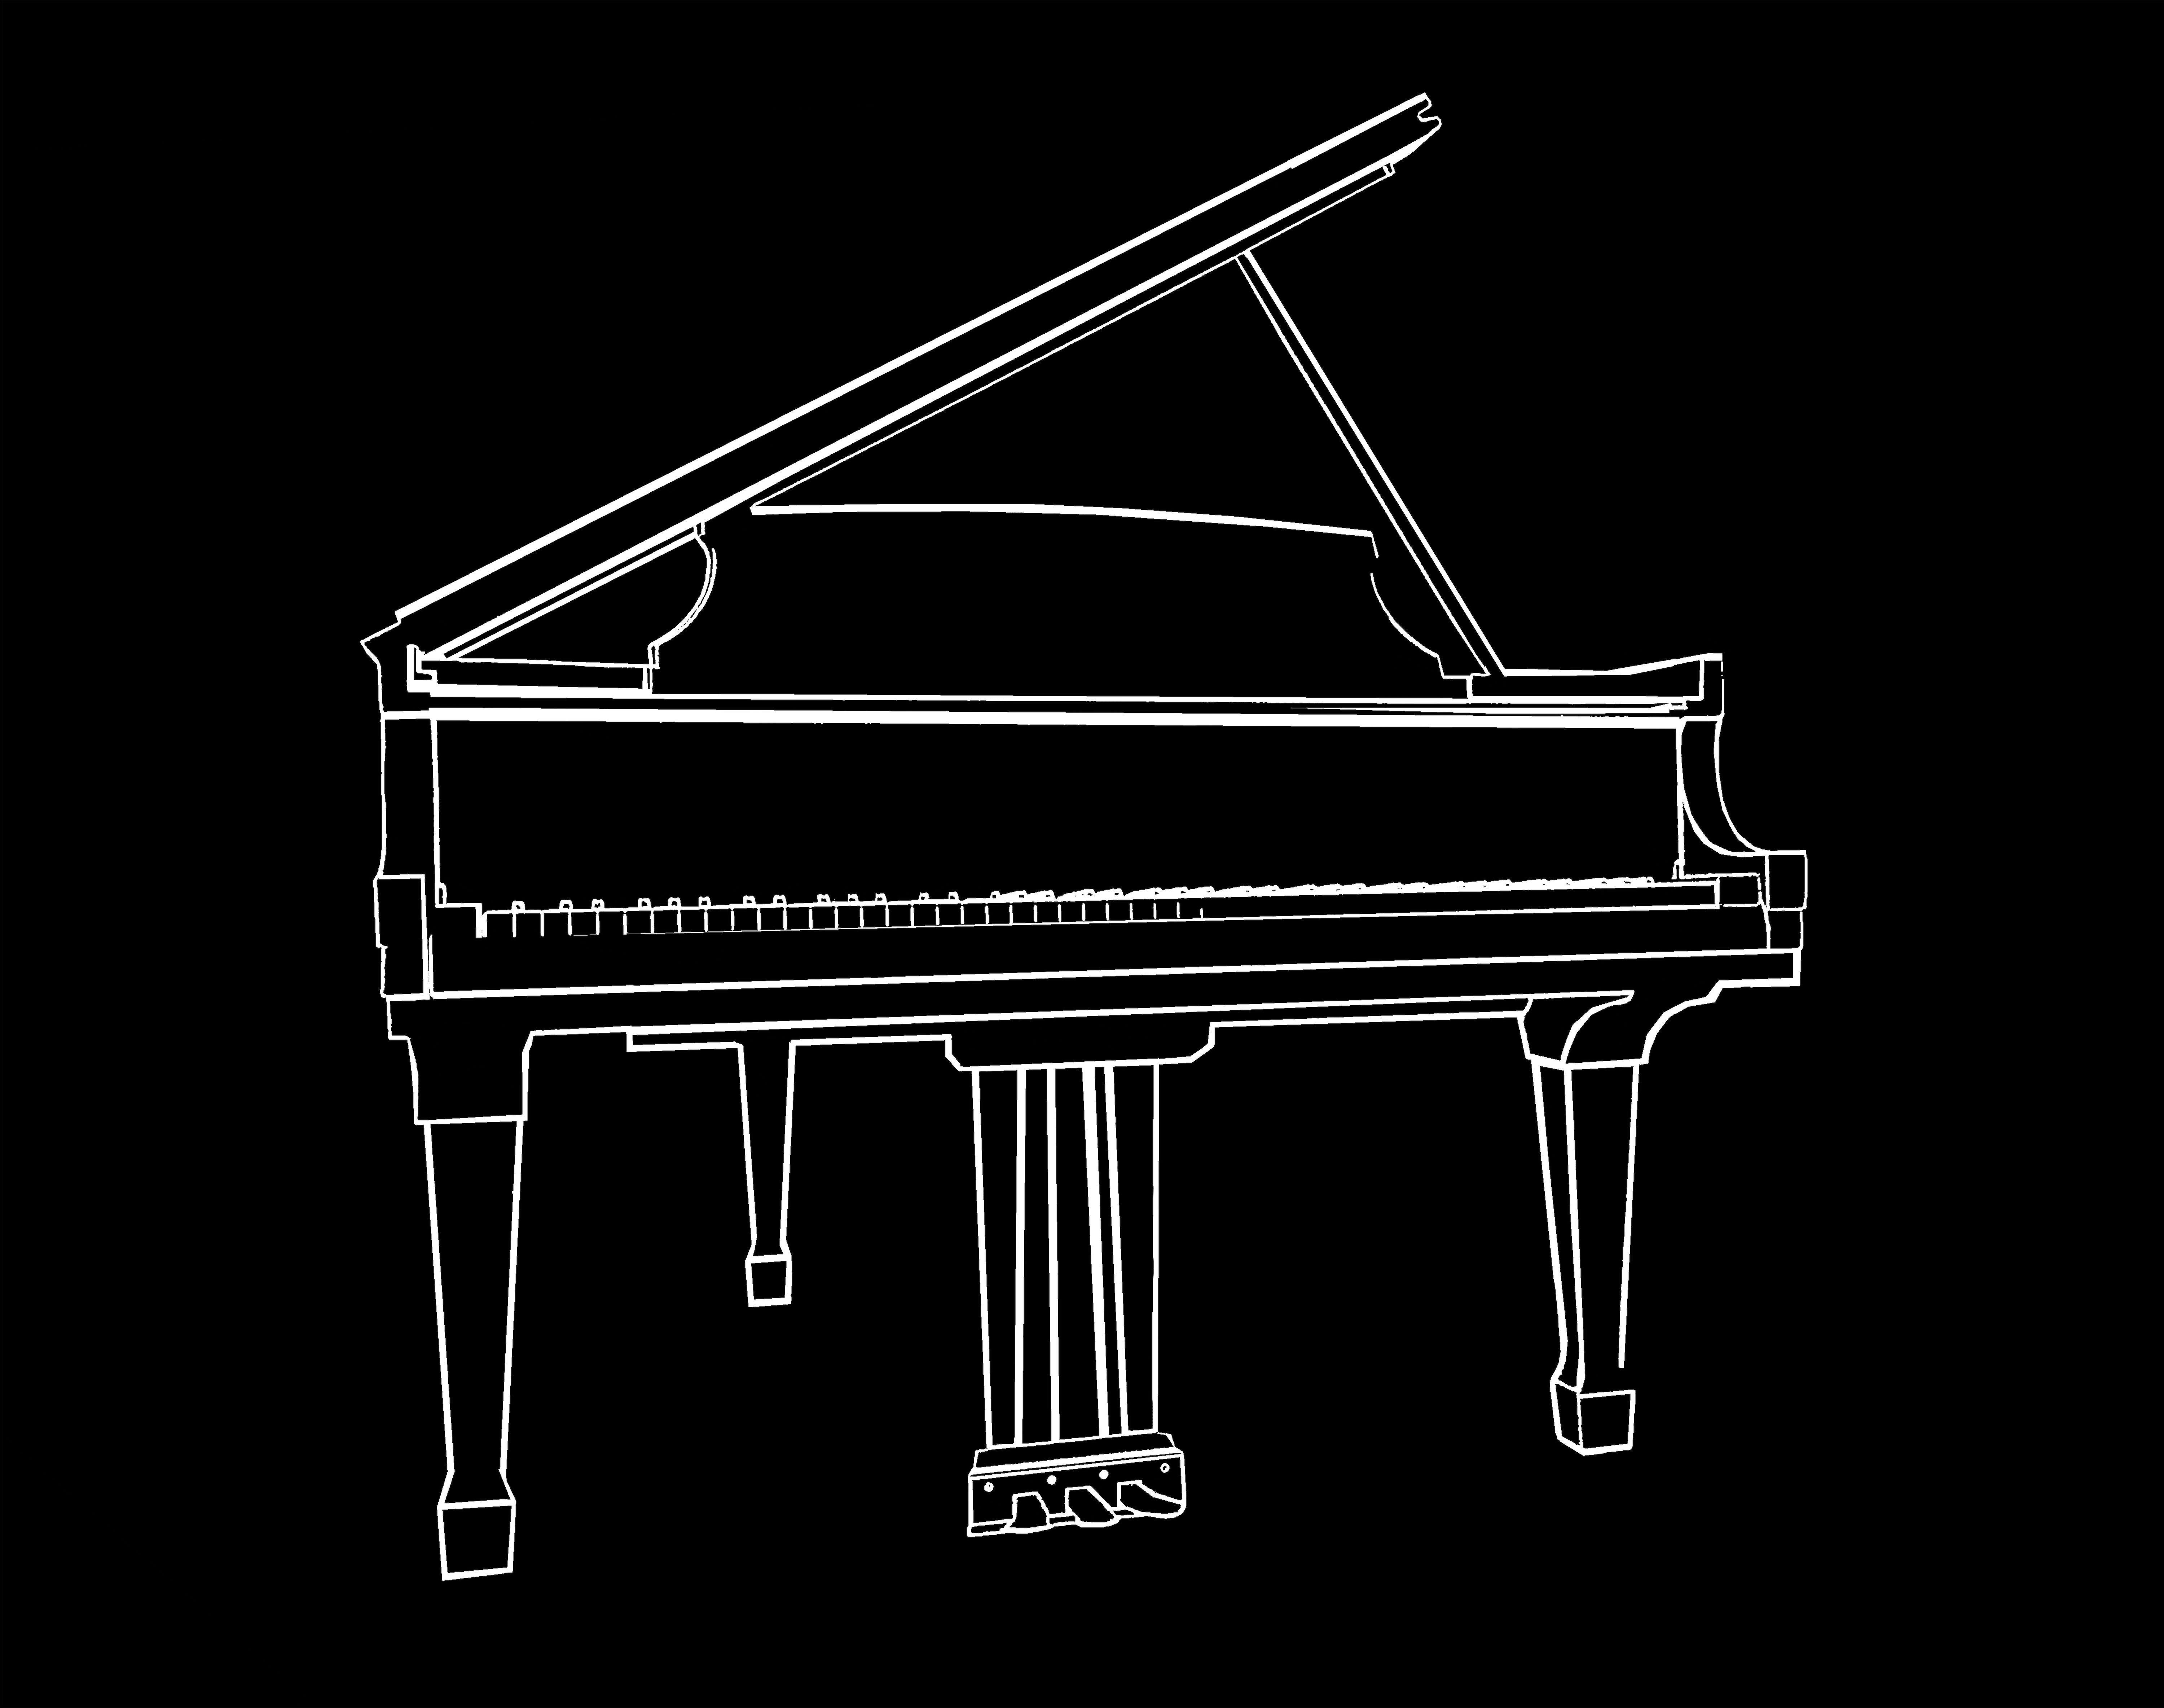 Richard Scudder, Grand Piano. Black & White Hand Signed And Numbered Serigraph

:: Hand Printed Work :: Art Deco/Art Nouveau :: This piece comes with an official certificate of authenticity signed by the artist :: Ready to Hang: No :: Signed: Yes ::